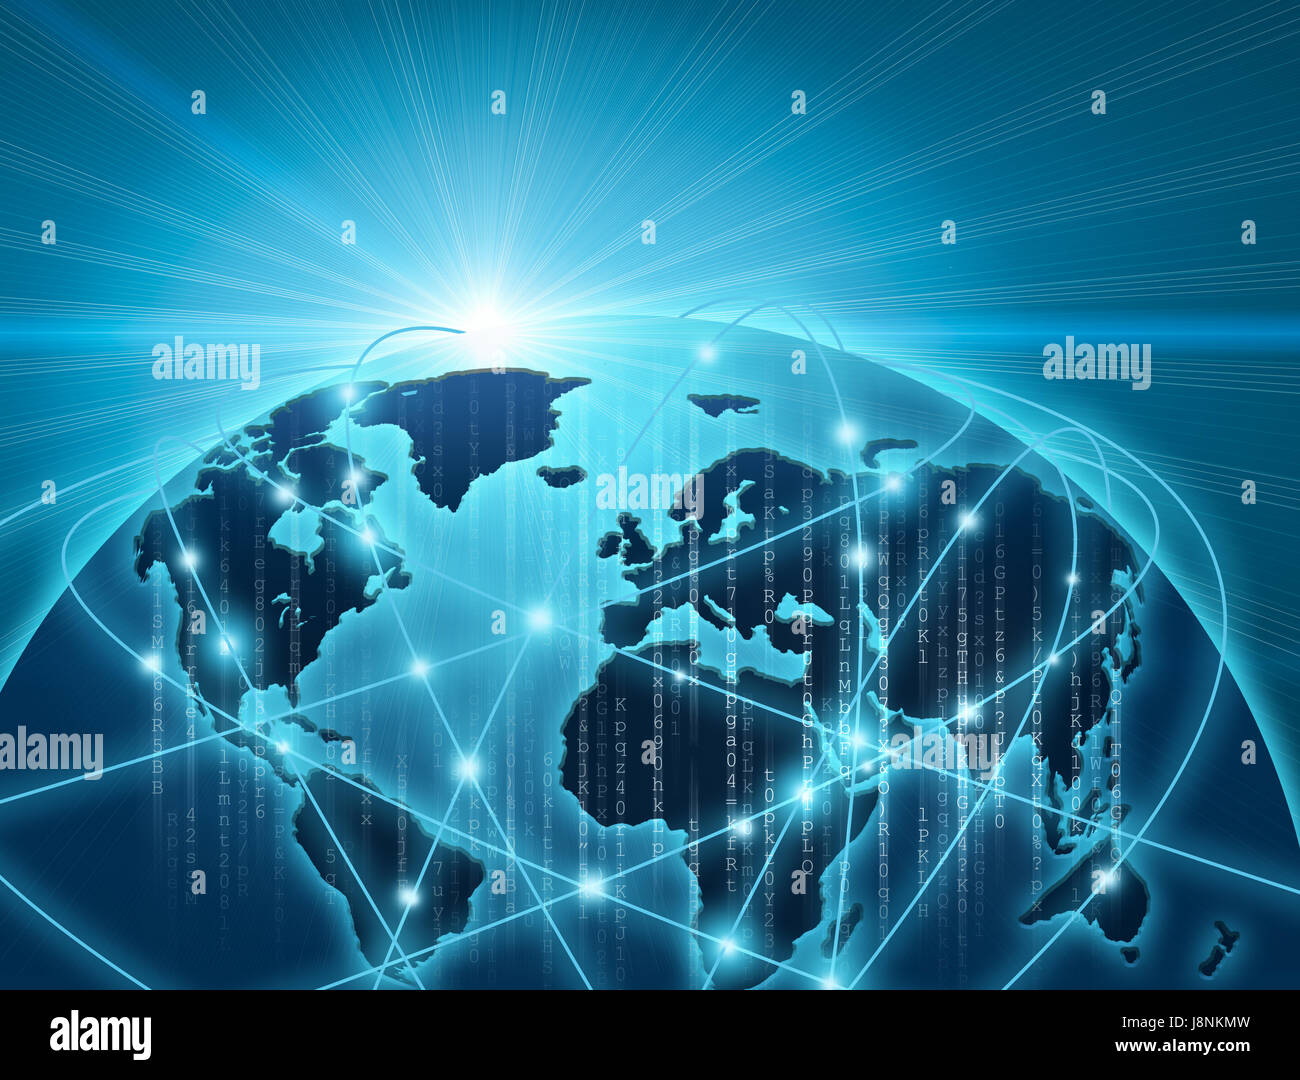 Globe network connection abstract background. Stock Photo